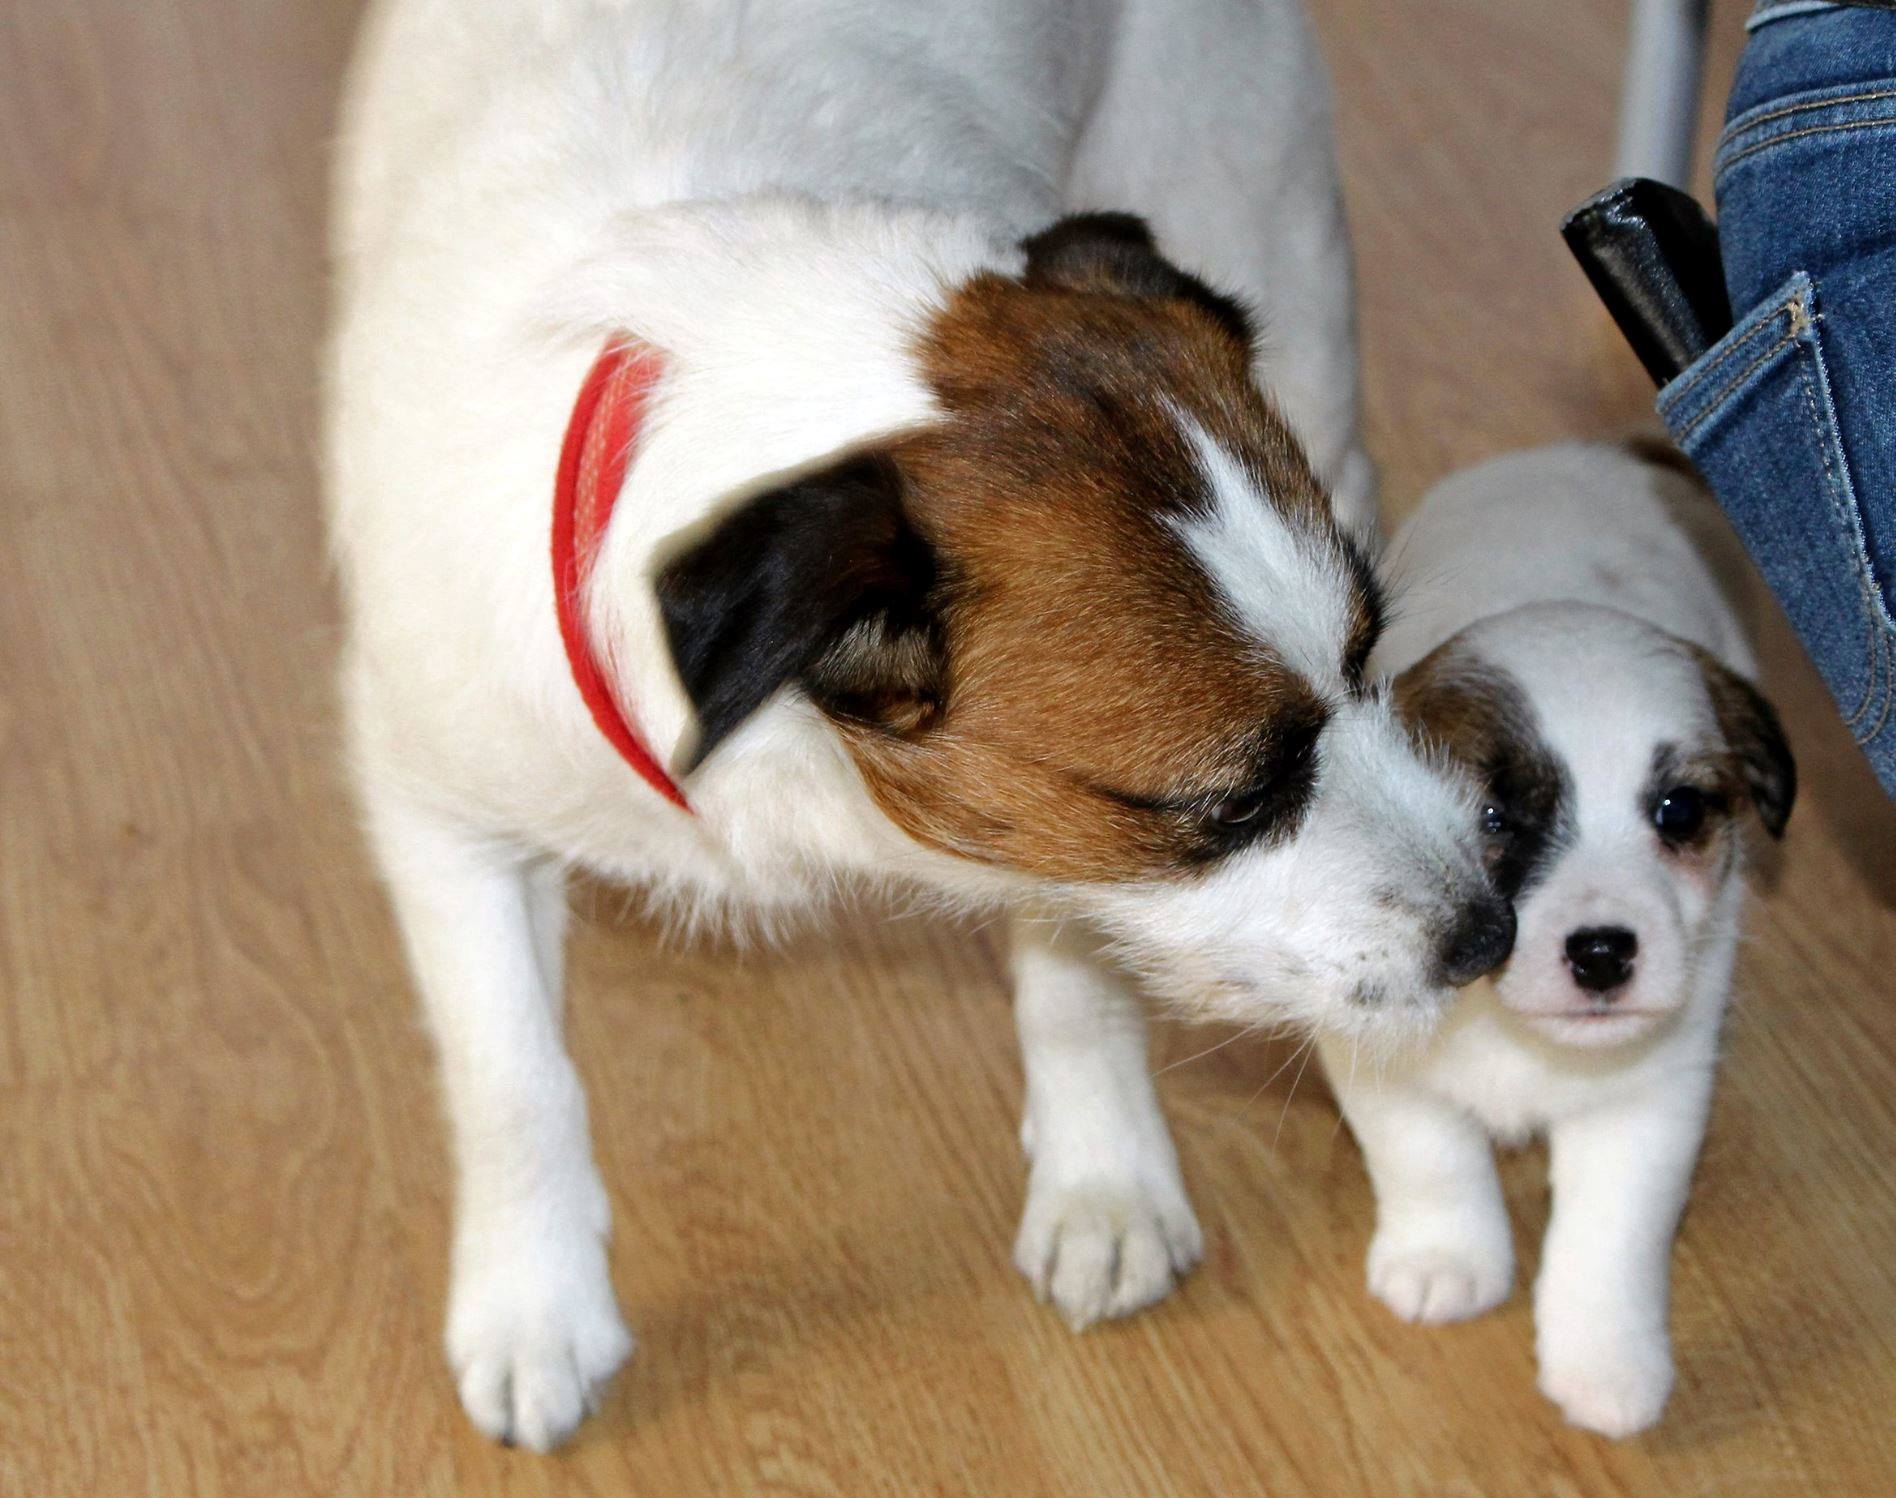 A Jack Russell Terrier smelling her puppy standing next to her on the floor